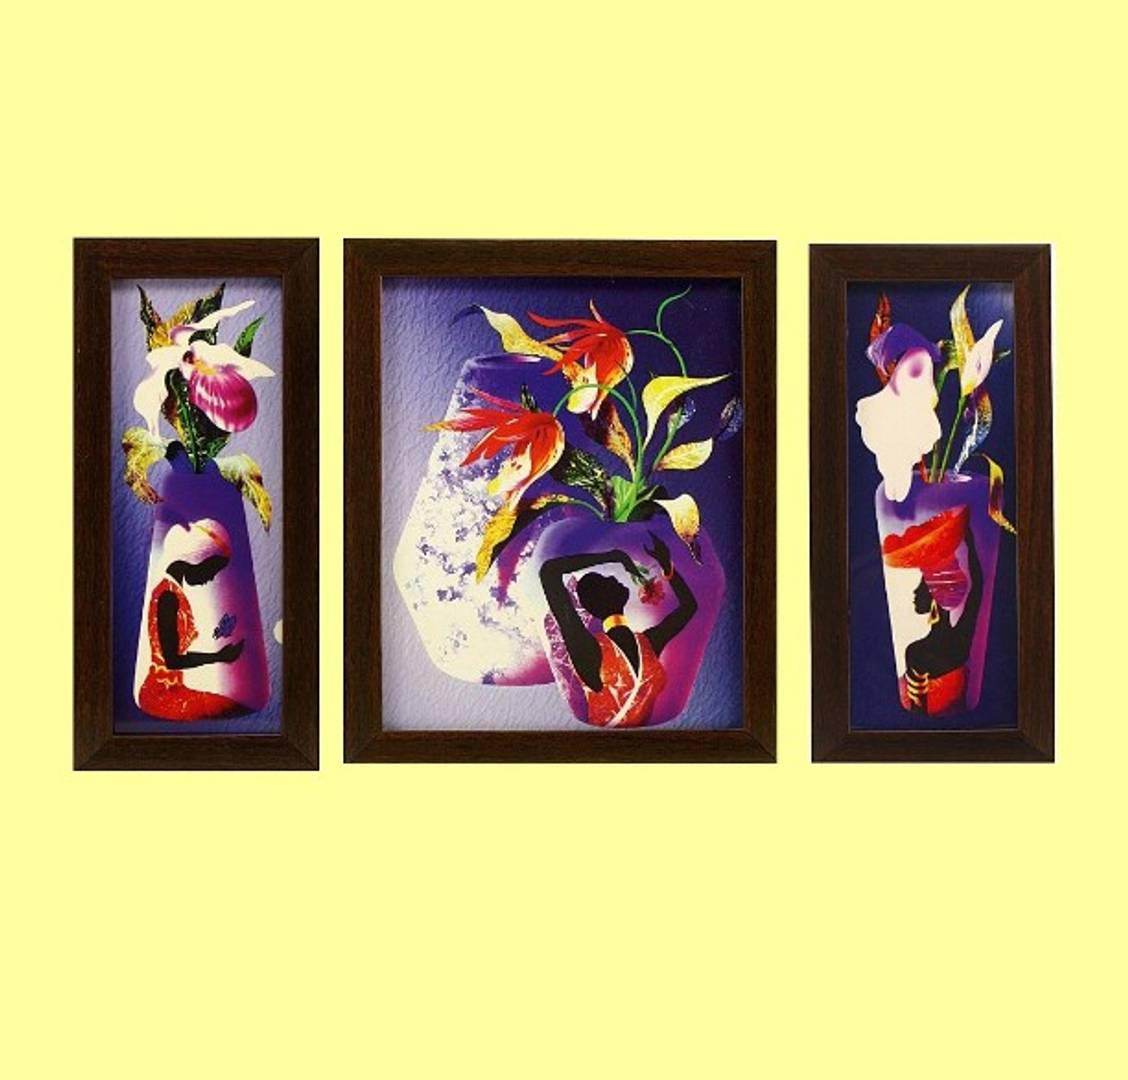 Floral Flower Vase Set of 3 perfect wall Framed decor modern Art painting for living room, bedroom, office, hotels ( 1 x Big Frame: 33 x 26 cm and 2 x Small Frame: 33 x 15 cm )